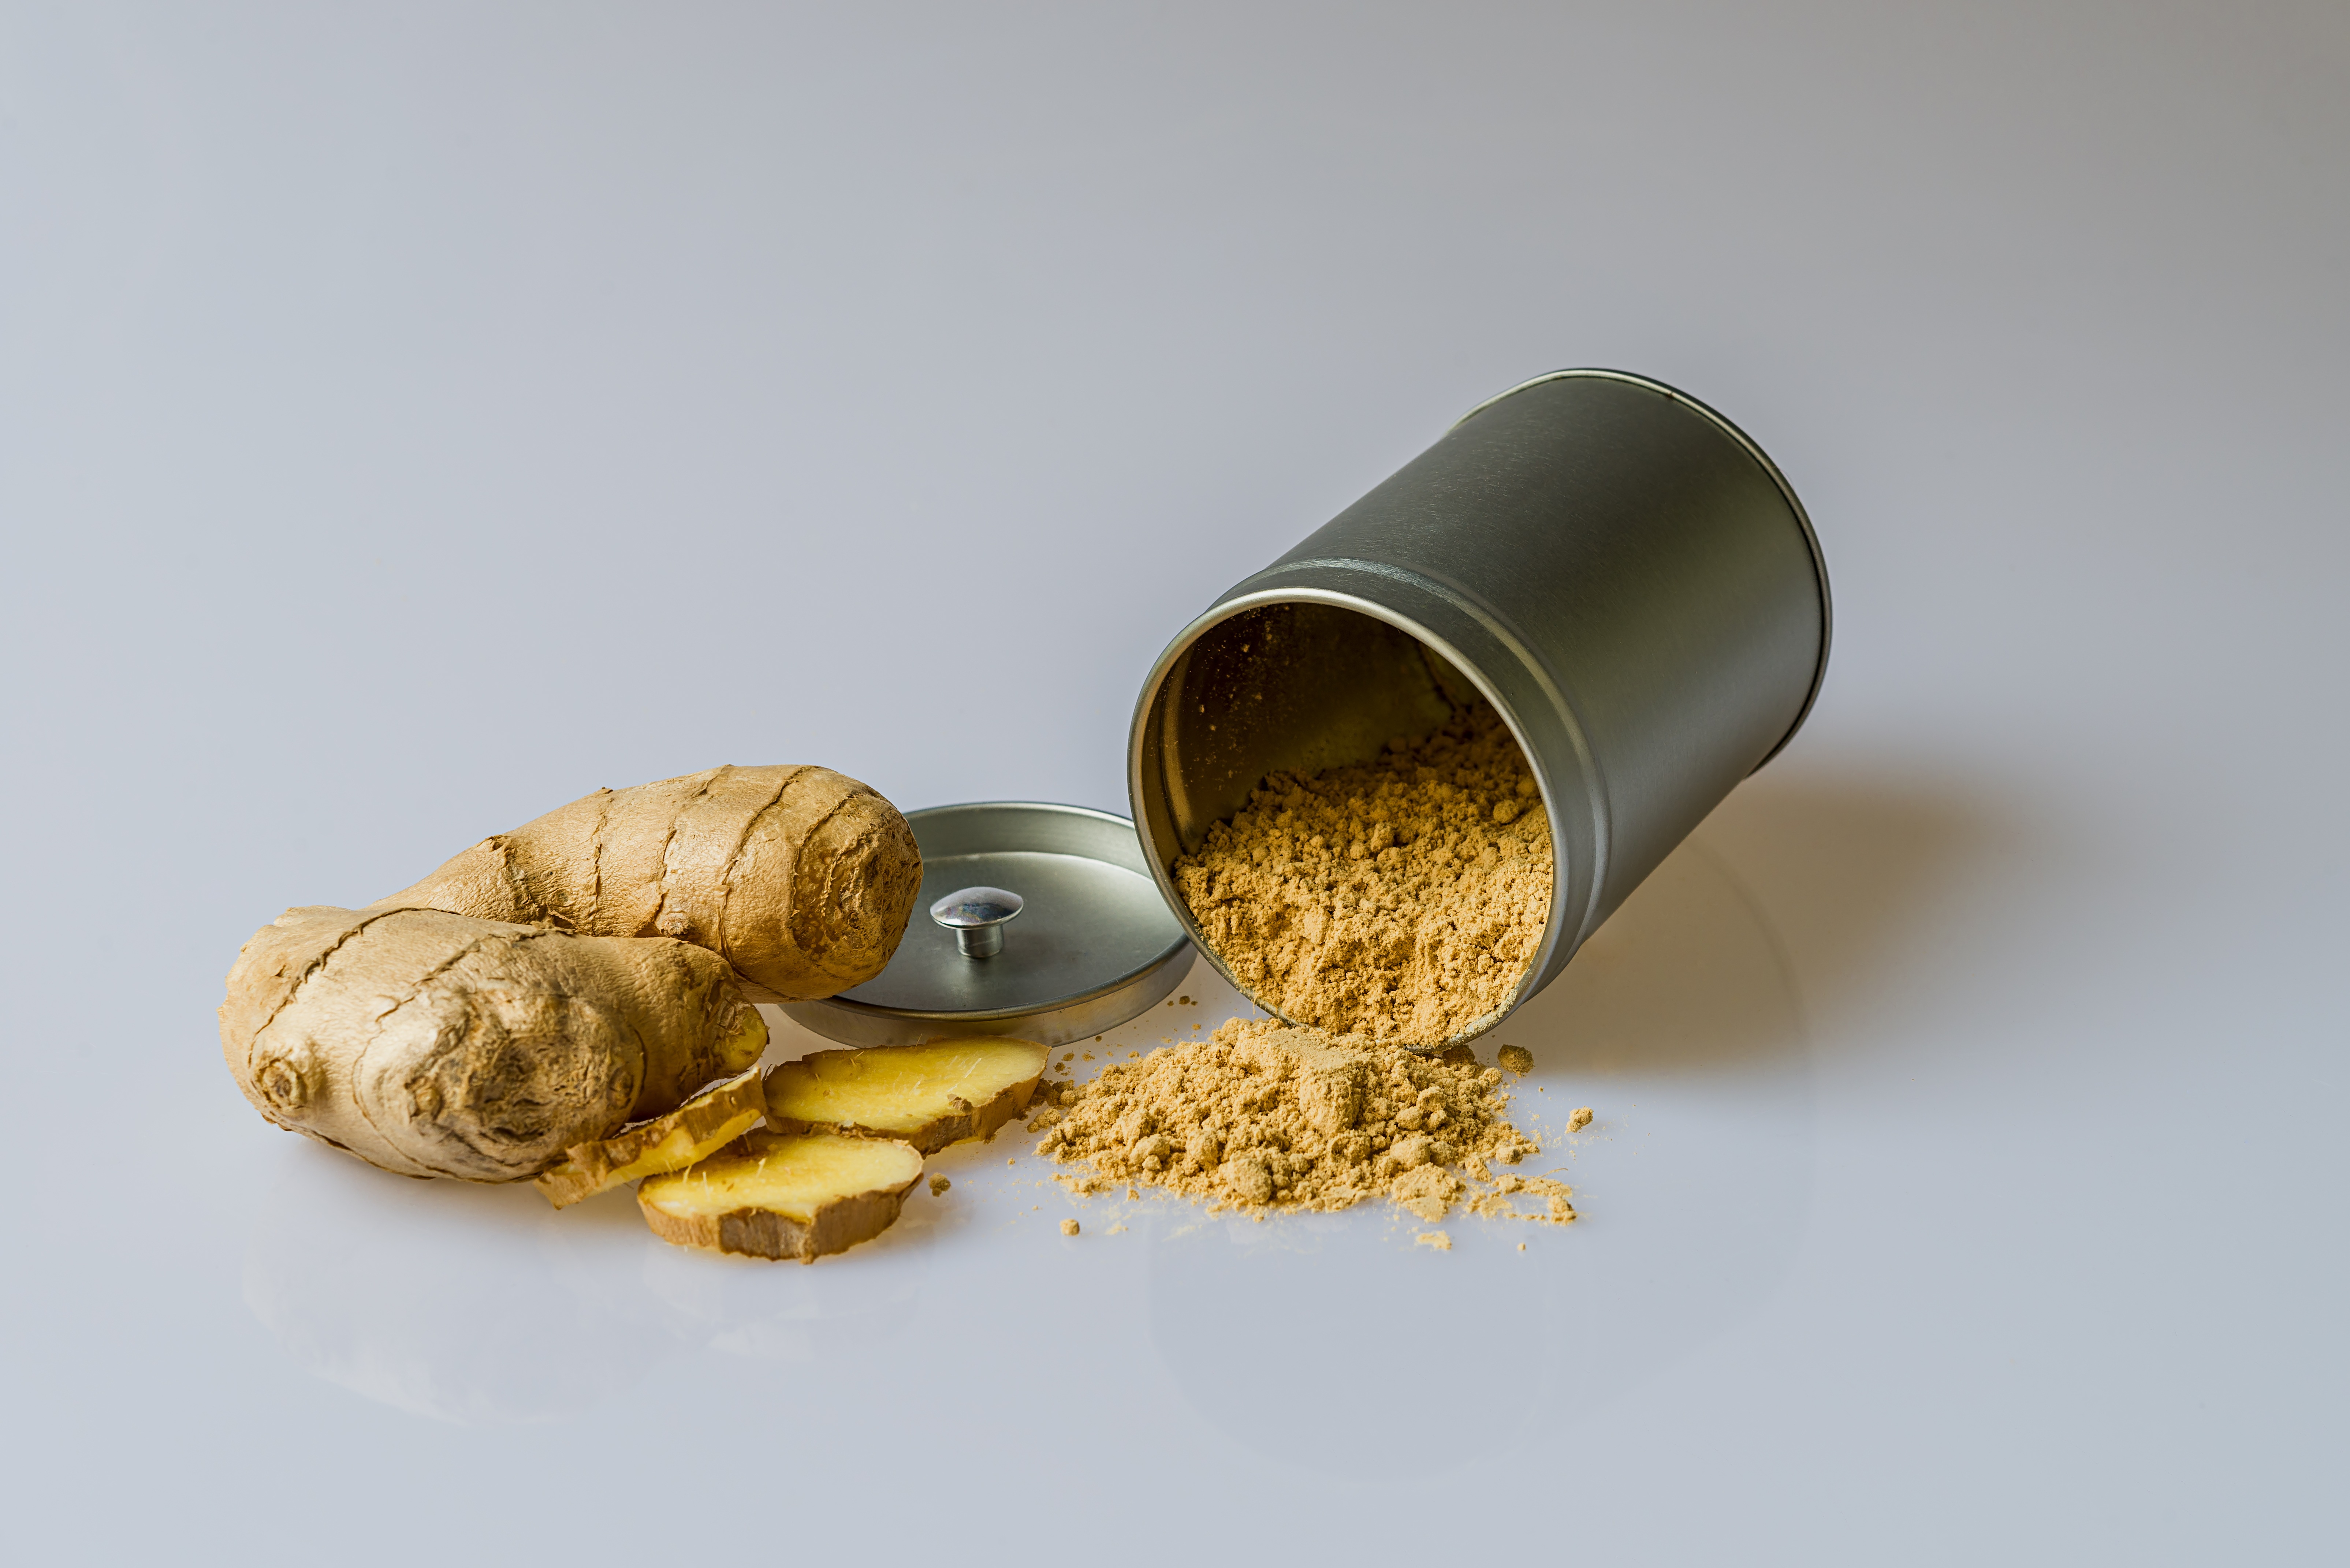 is ginger a natural pain reliever?